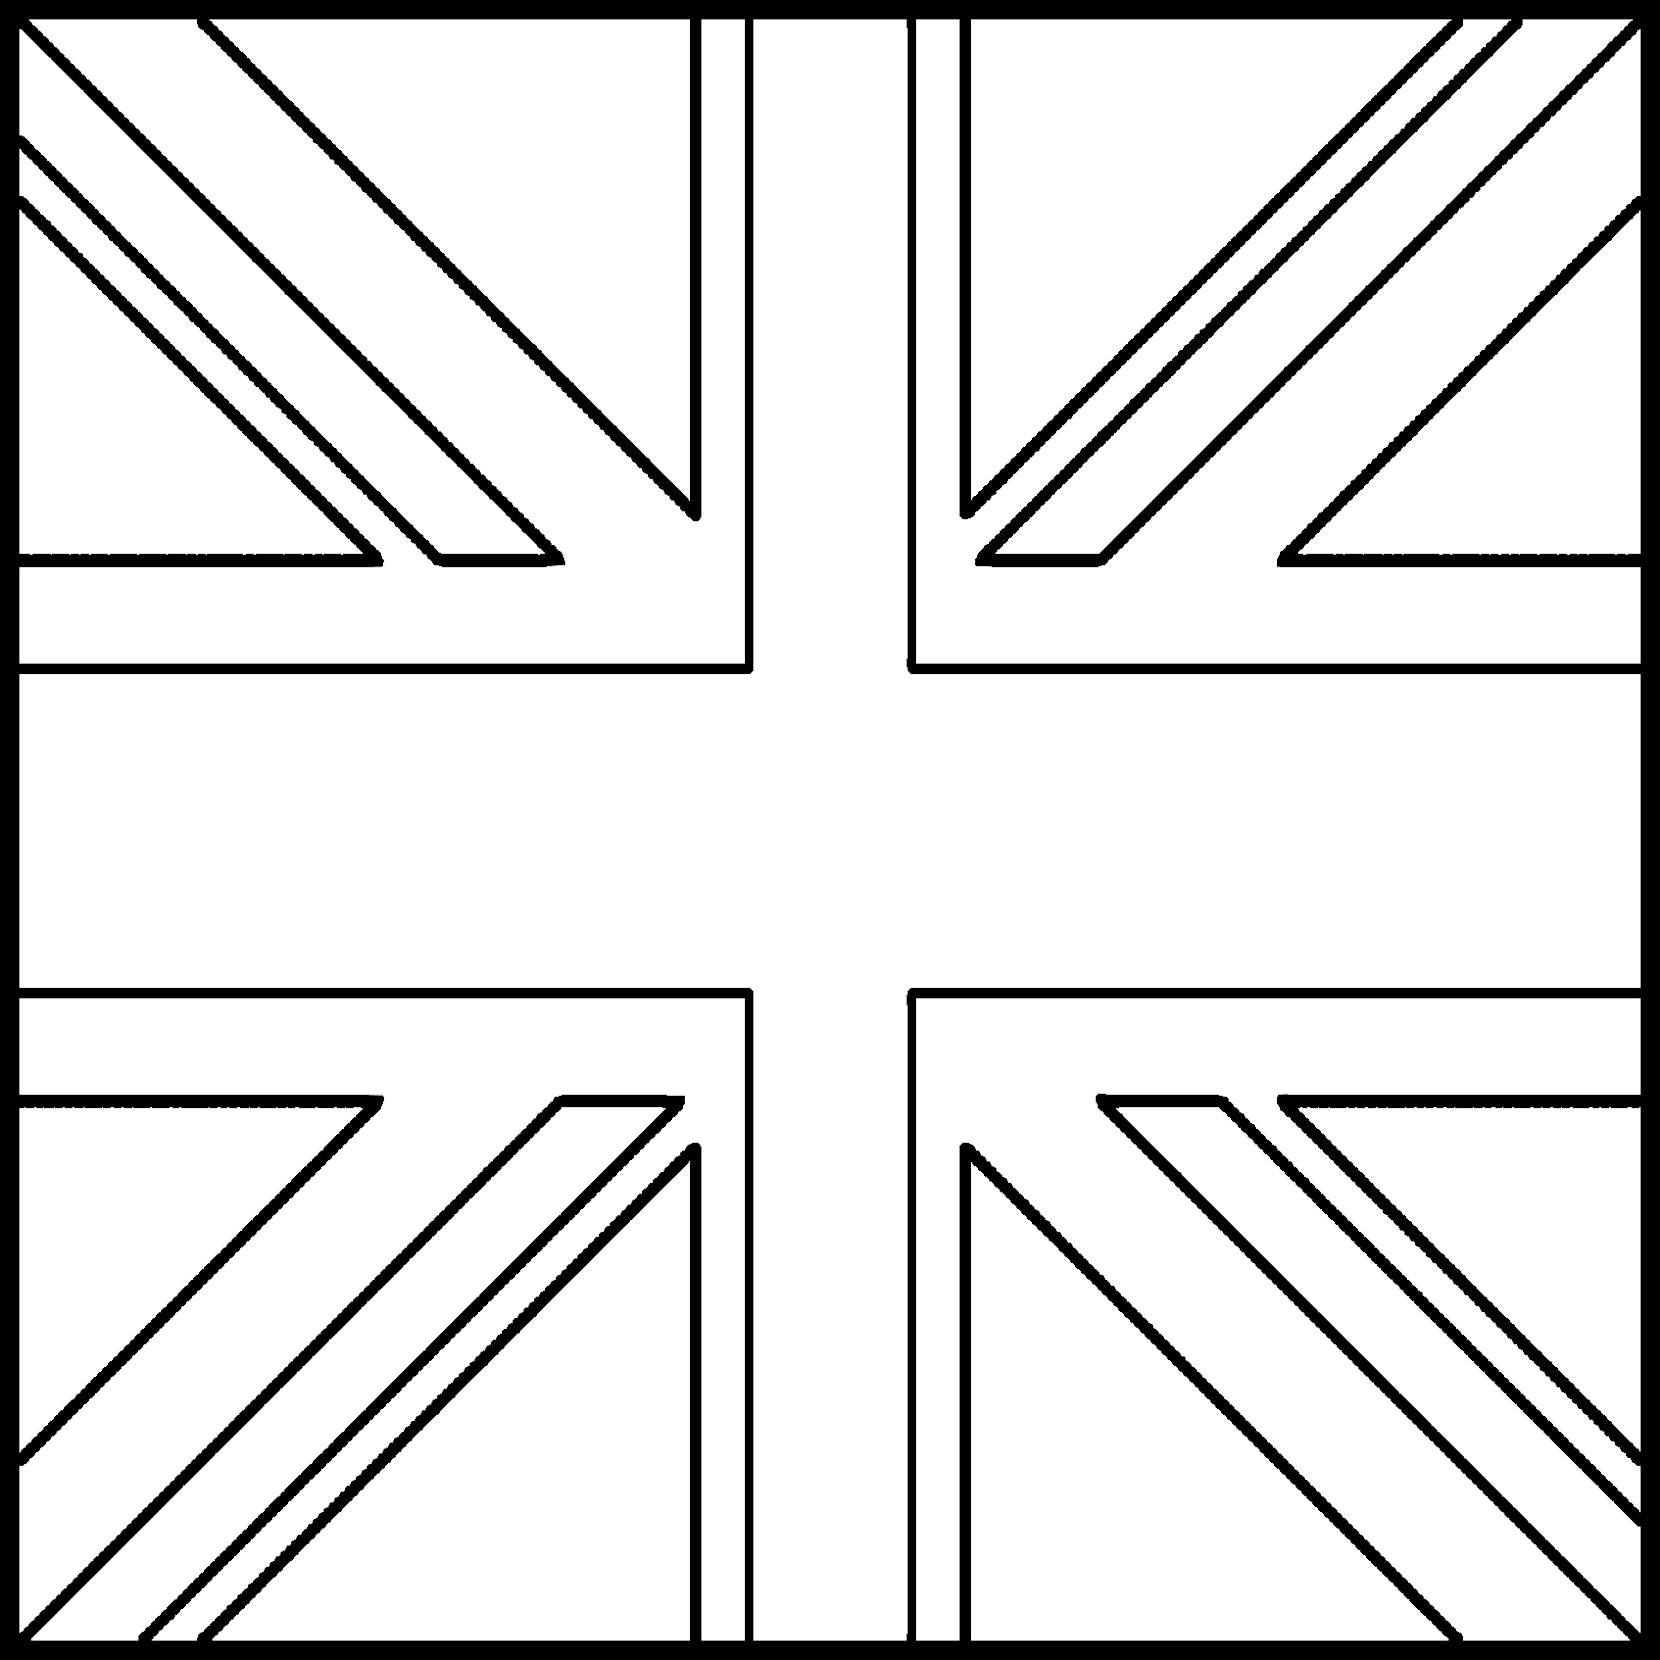 England Flag Coloring Page At Getdrawings Com 7C Free For Personal